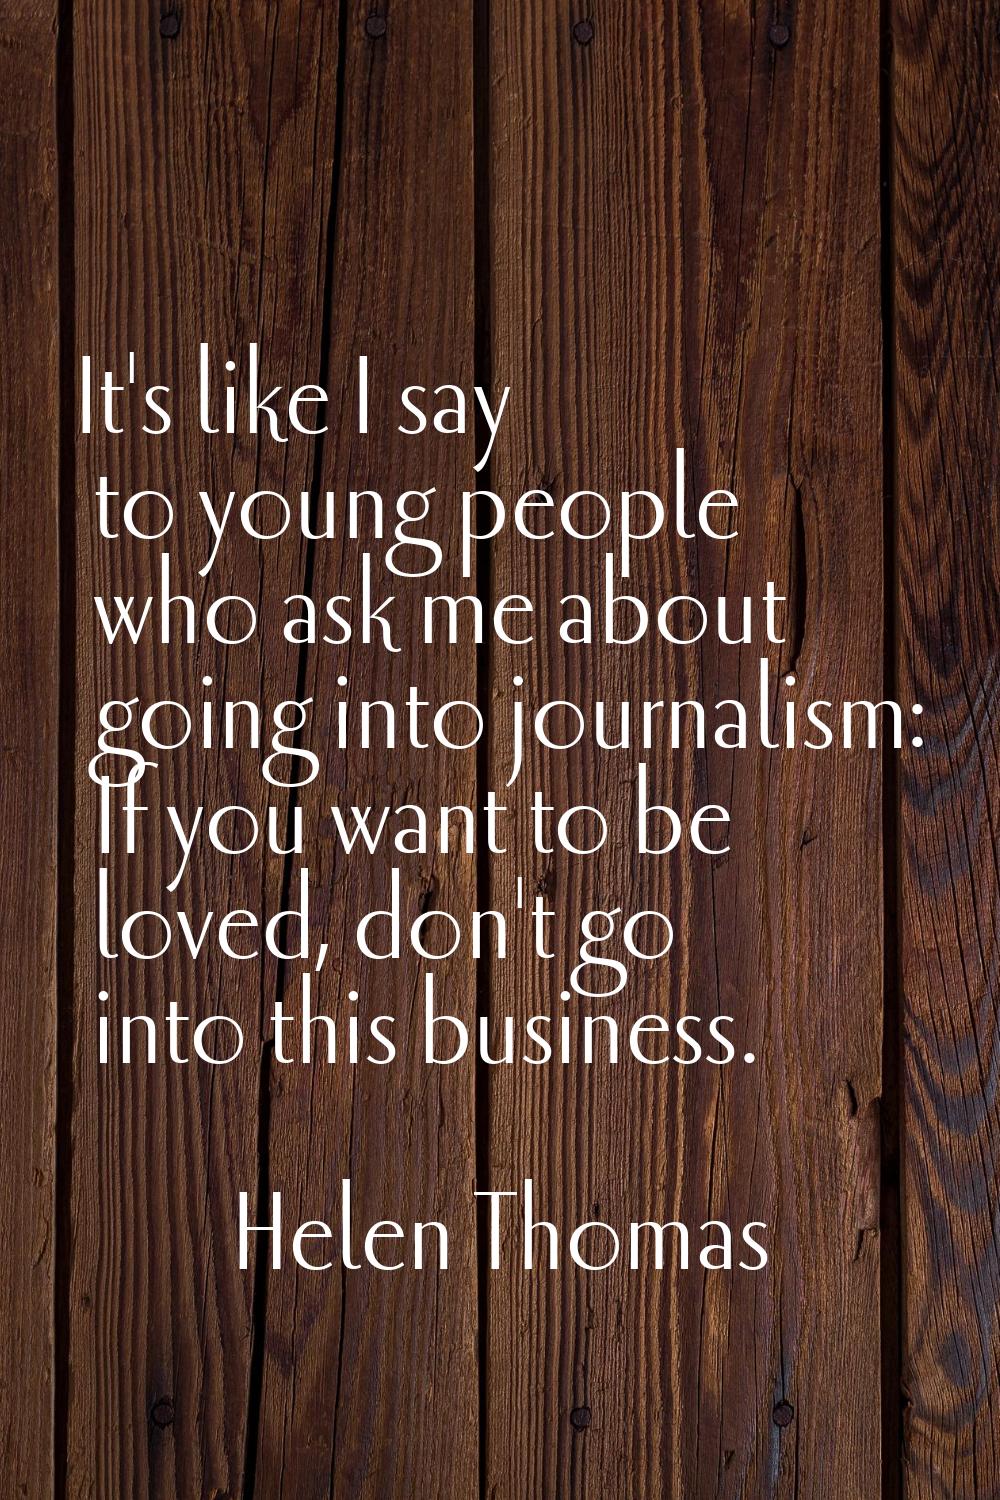 It's like I say to young people who ask me about going into journalism: If you want to be loved, do